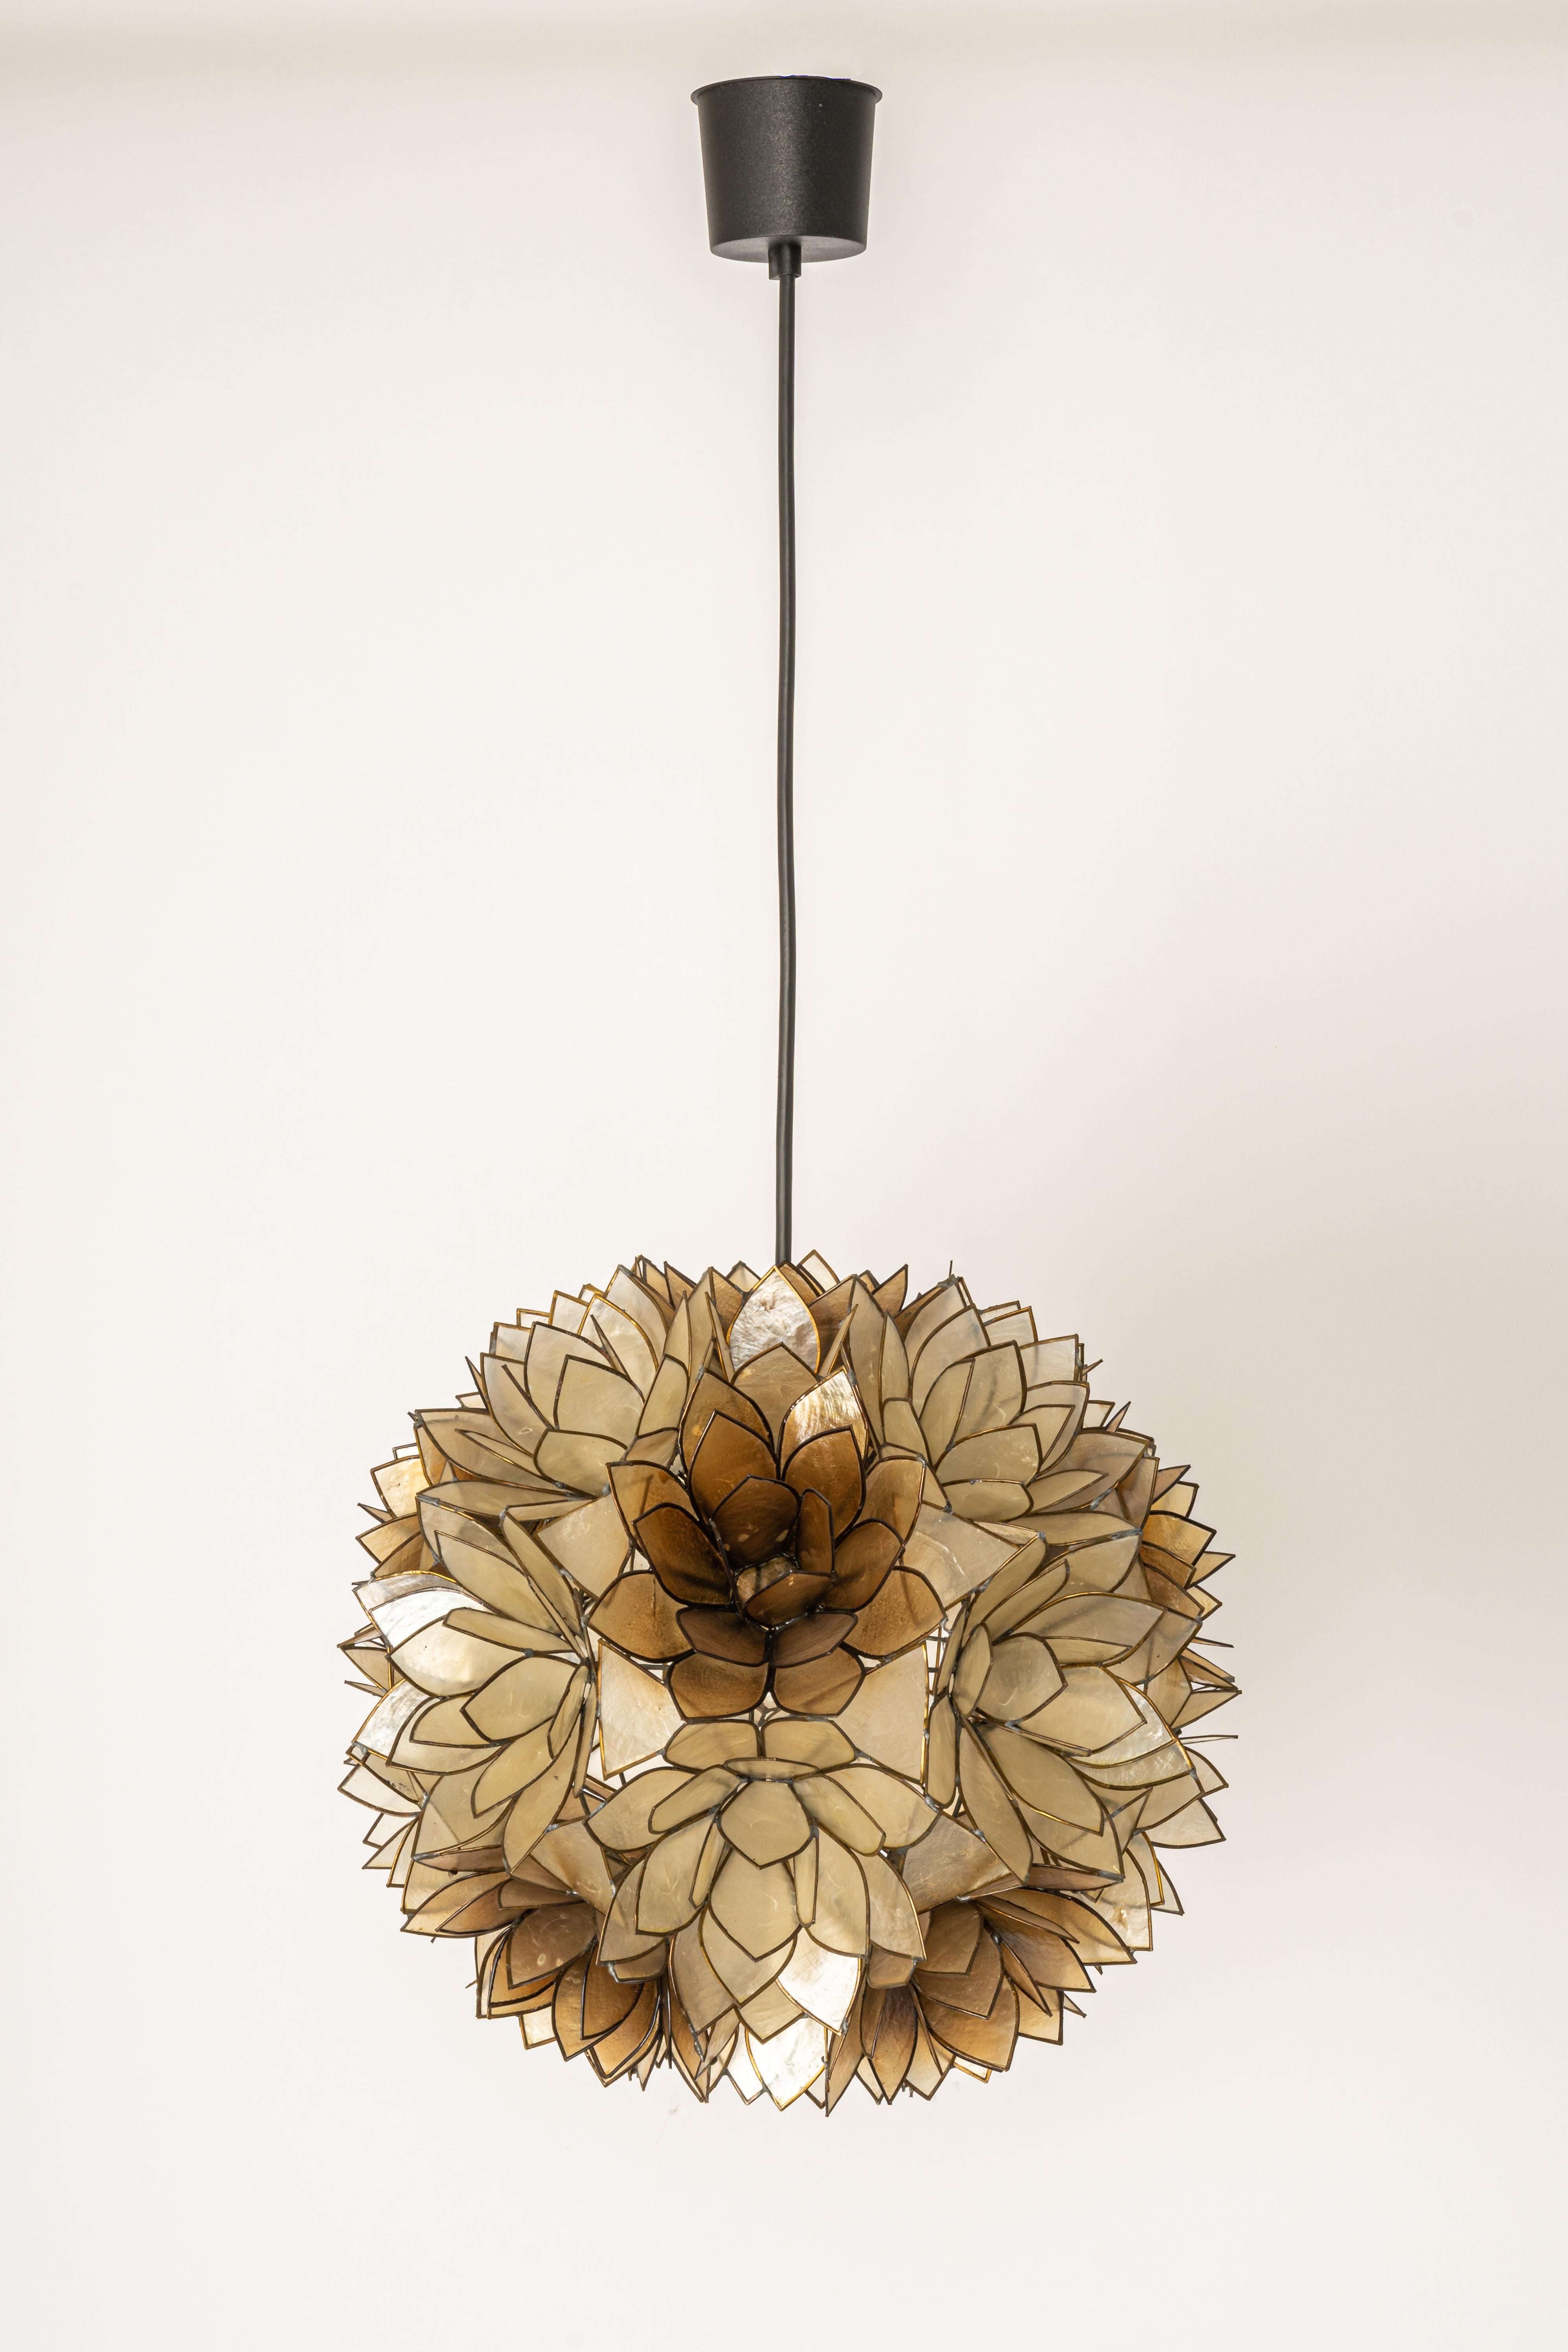 Stunning Capiz shell Lotus ball chandelier pendant light Germany, 1960s

It requires 1 x E27 standard bulbs with 100W max each.
A light bulb is not included. It is possible to install this fixture in all countries (US, UK, Europe, Asia,